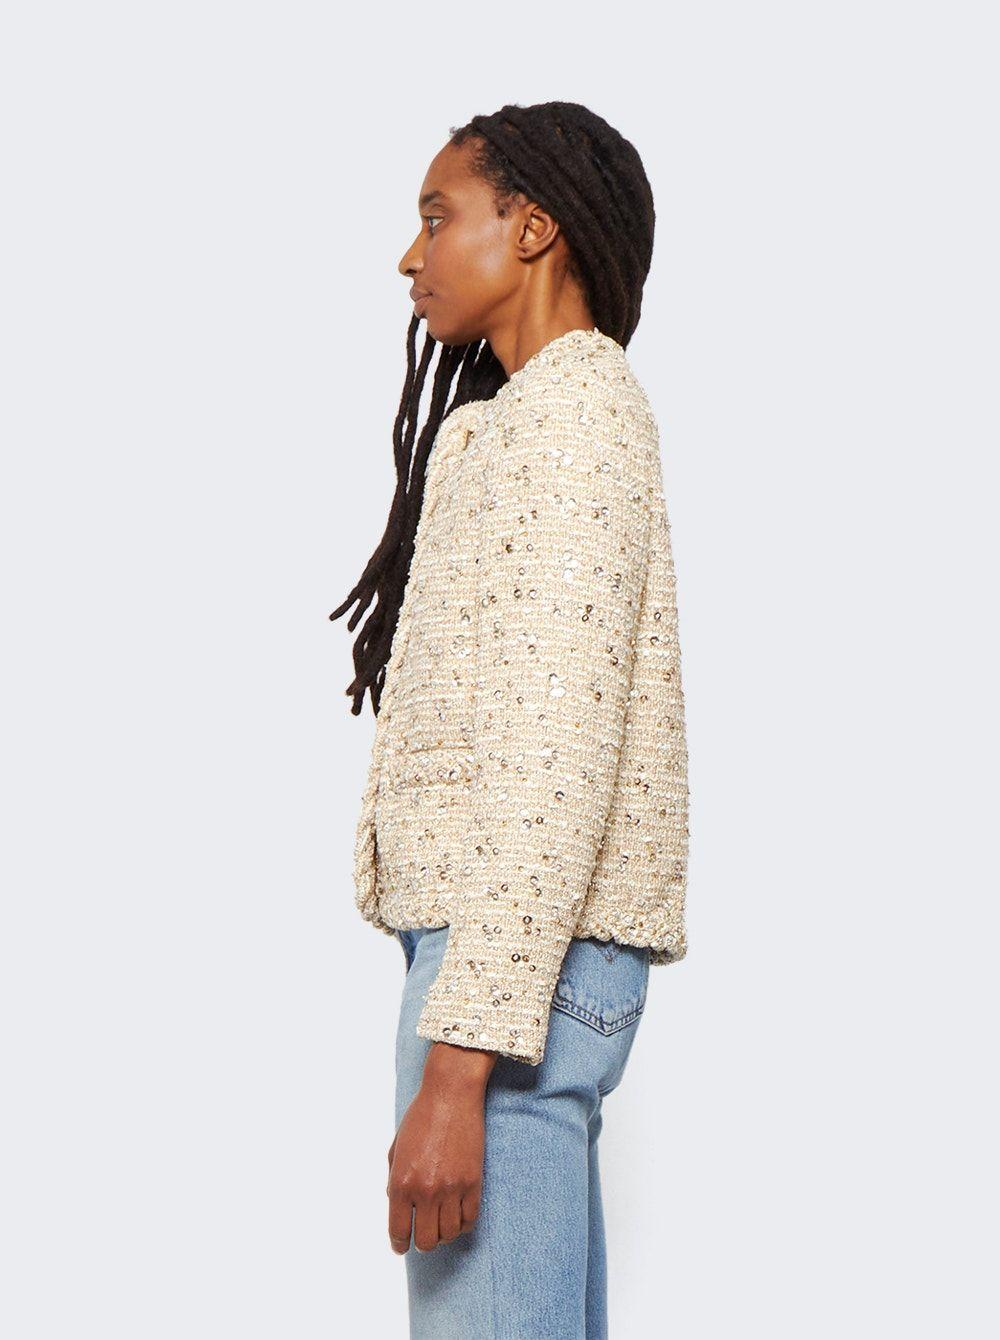 Valentino Giacca Tweed Ricamo Allover Jacket in White | Lyst